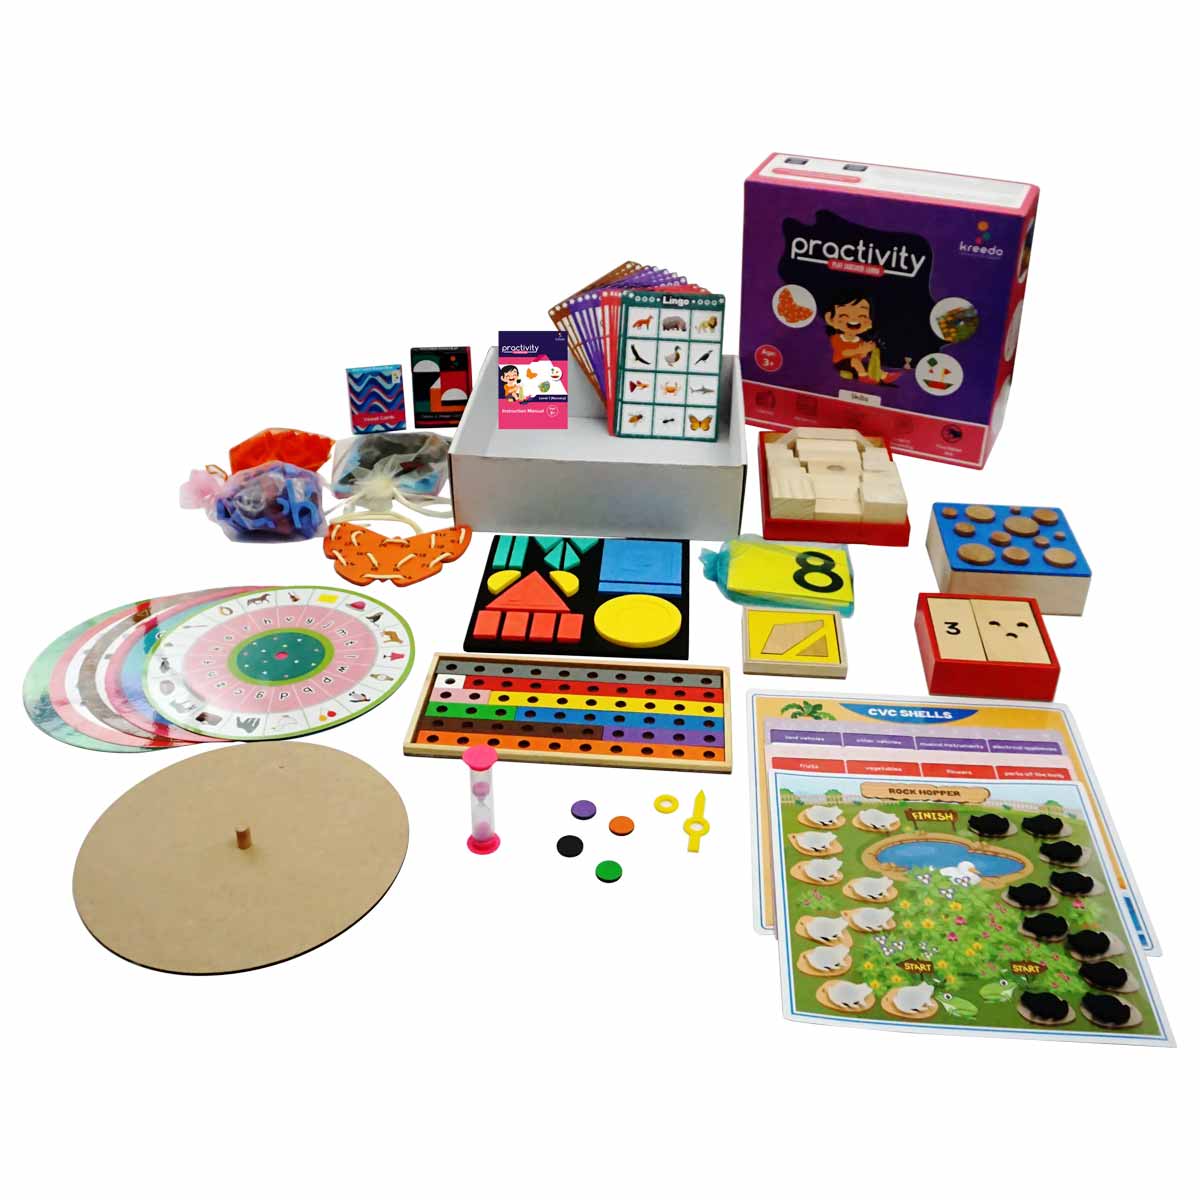 Buy Kreedo Practivity Toy Box - Level 1, For 3-4 Year Olds - Content - SkilloToys.com